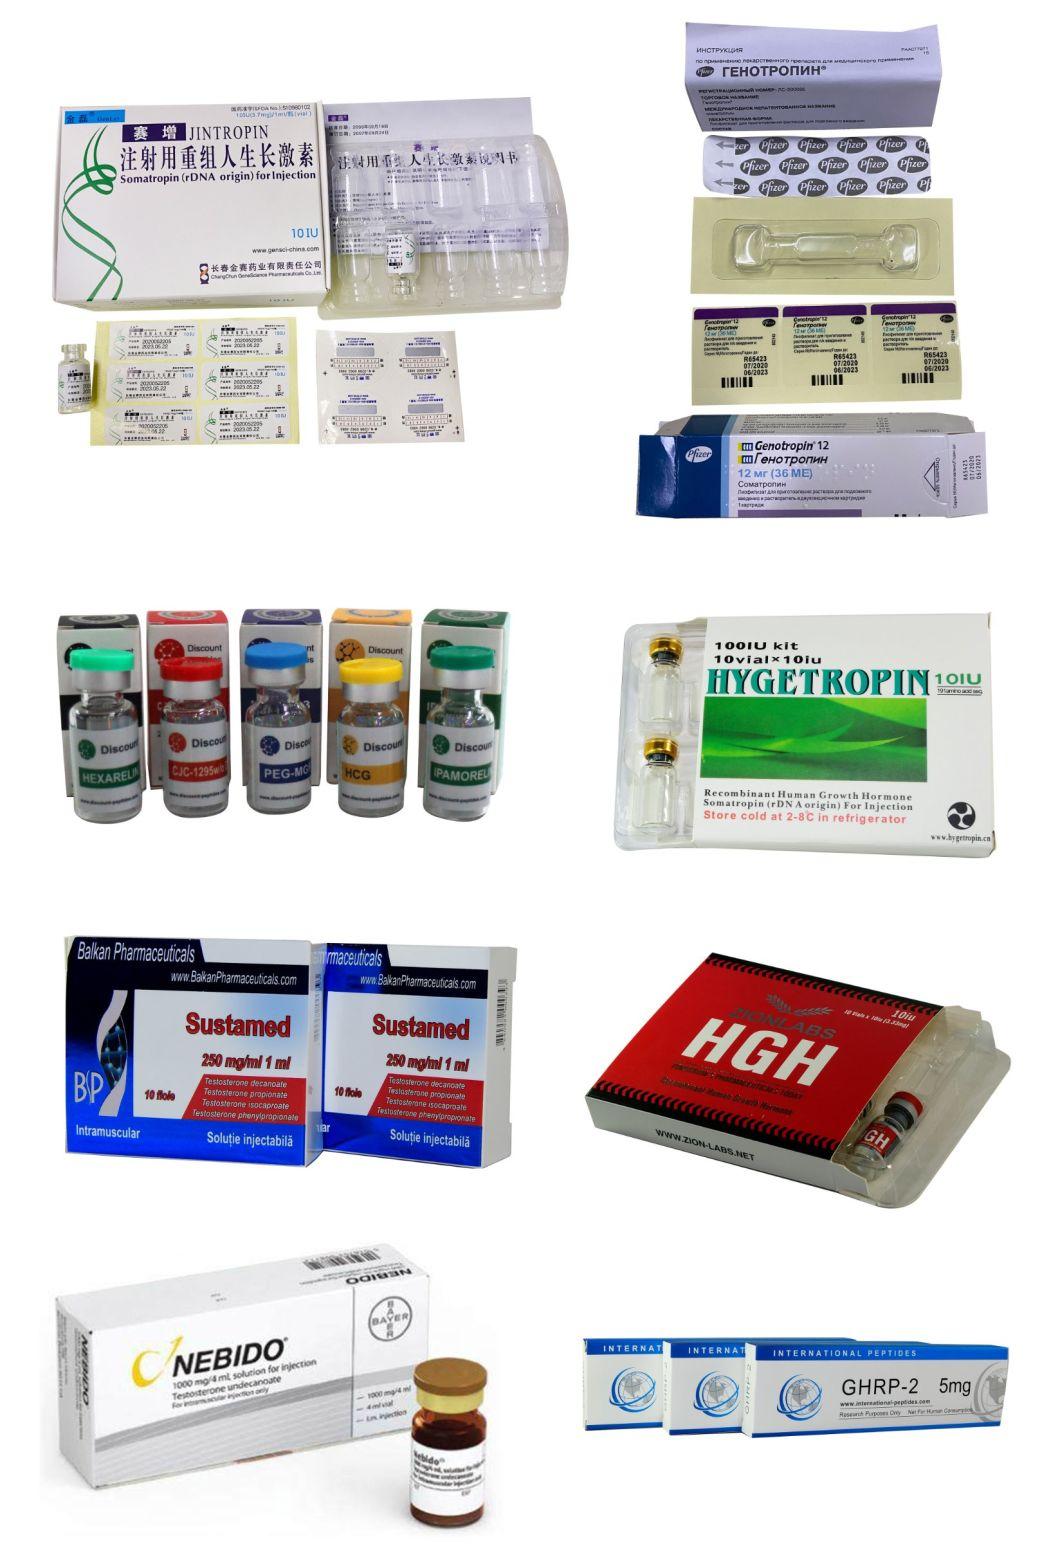 Free Design Norvatis Body Building Popular Selling 10iu 2ml Vial Label H Gh Packaging Boxes